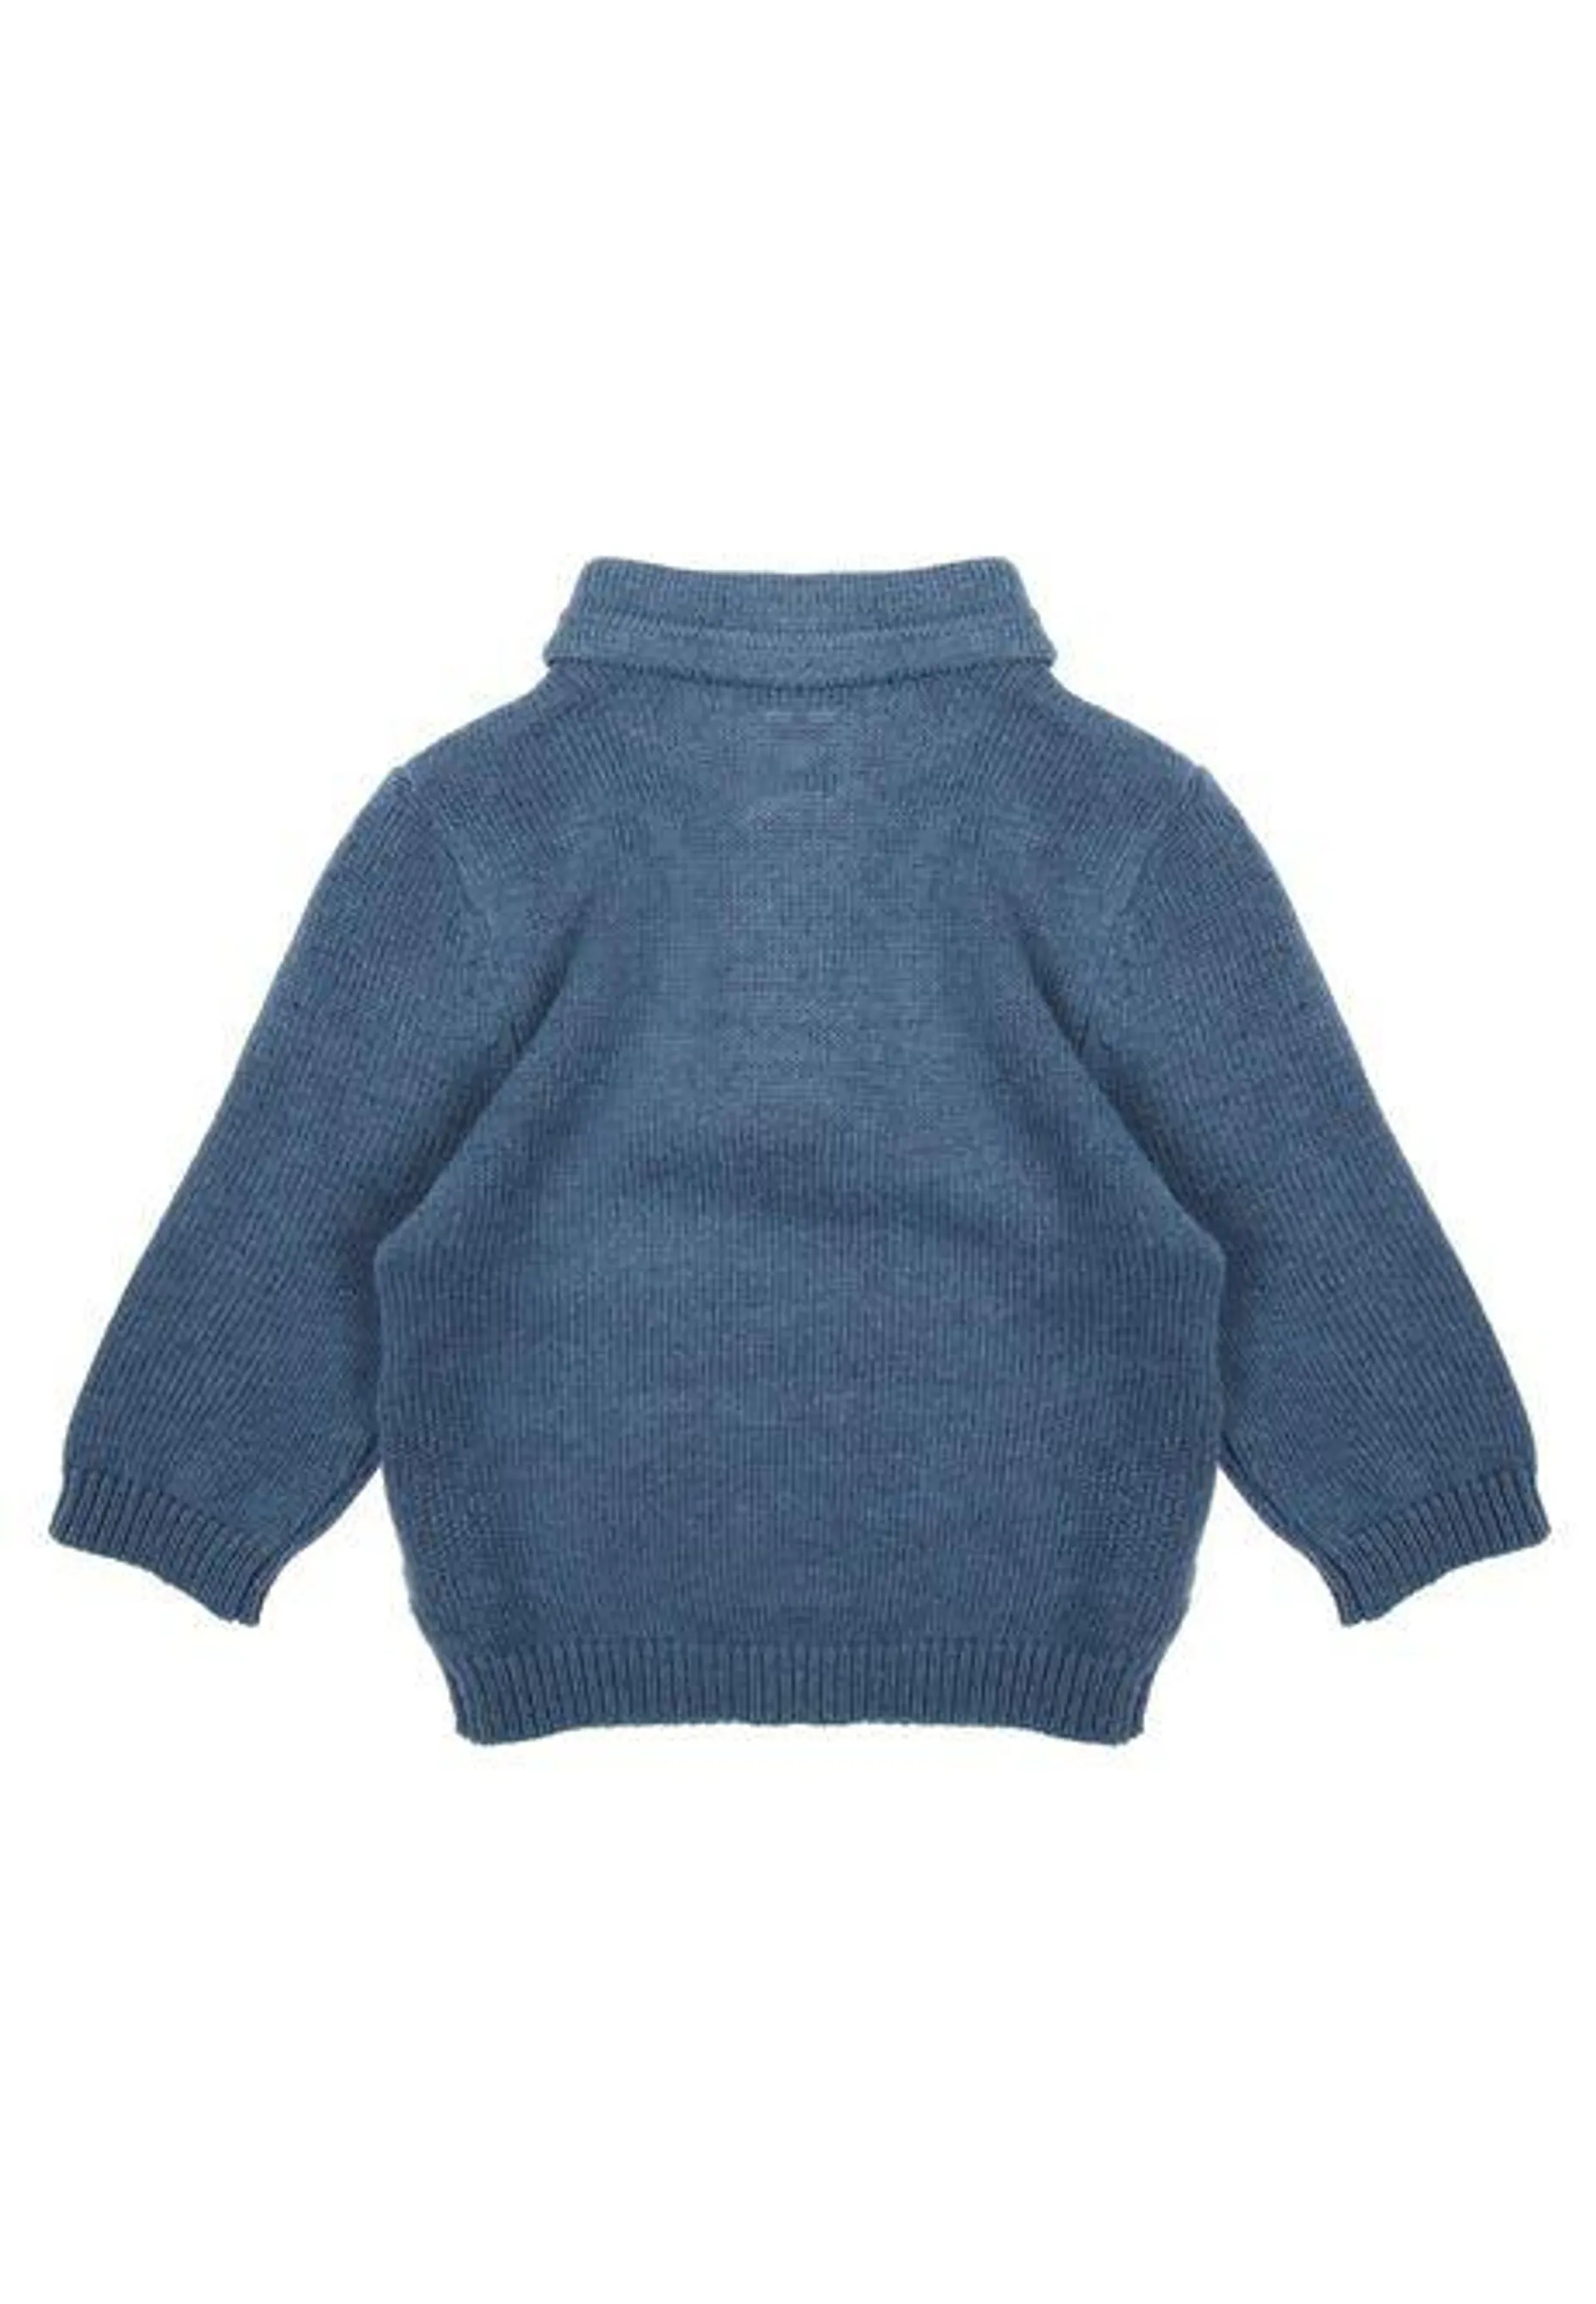 Baby Boys Blue Knitted Jumper with Collar